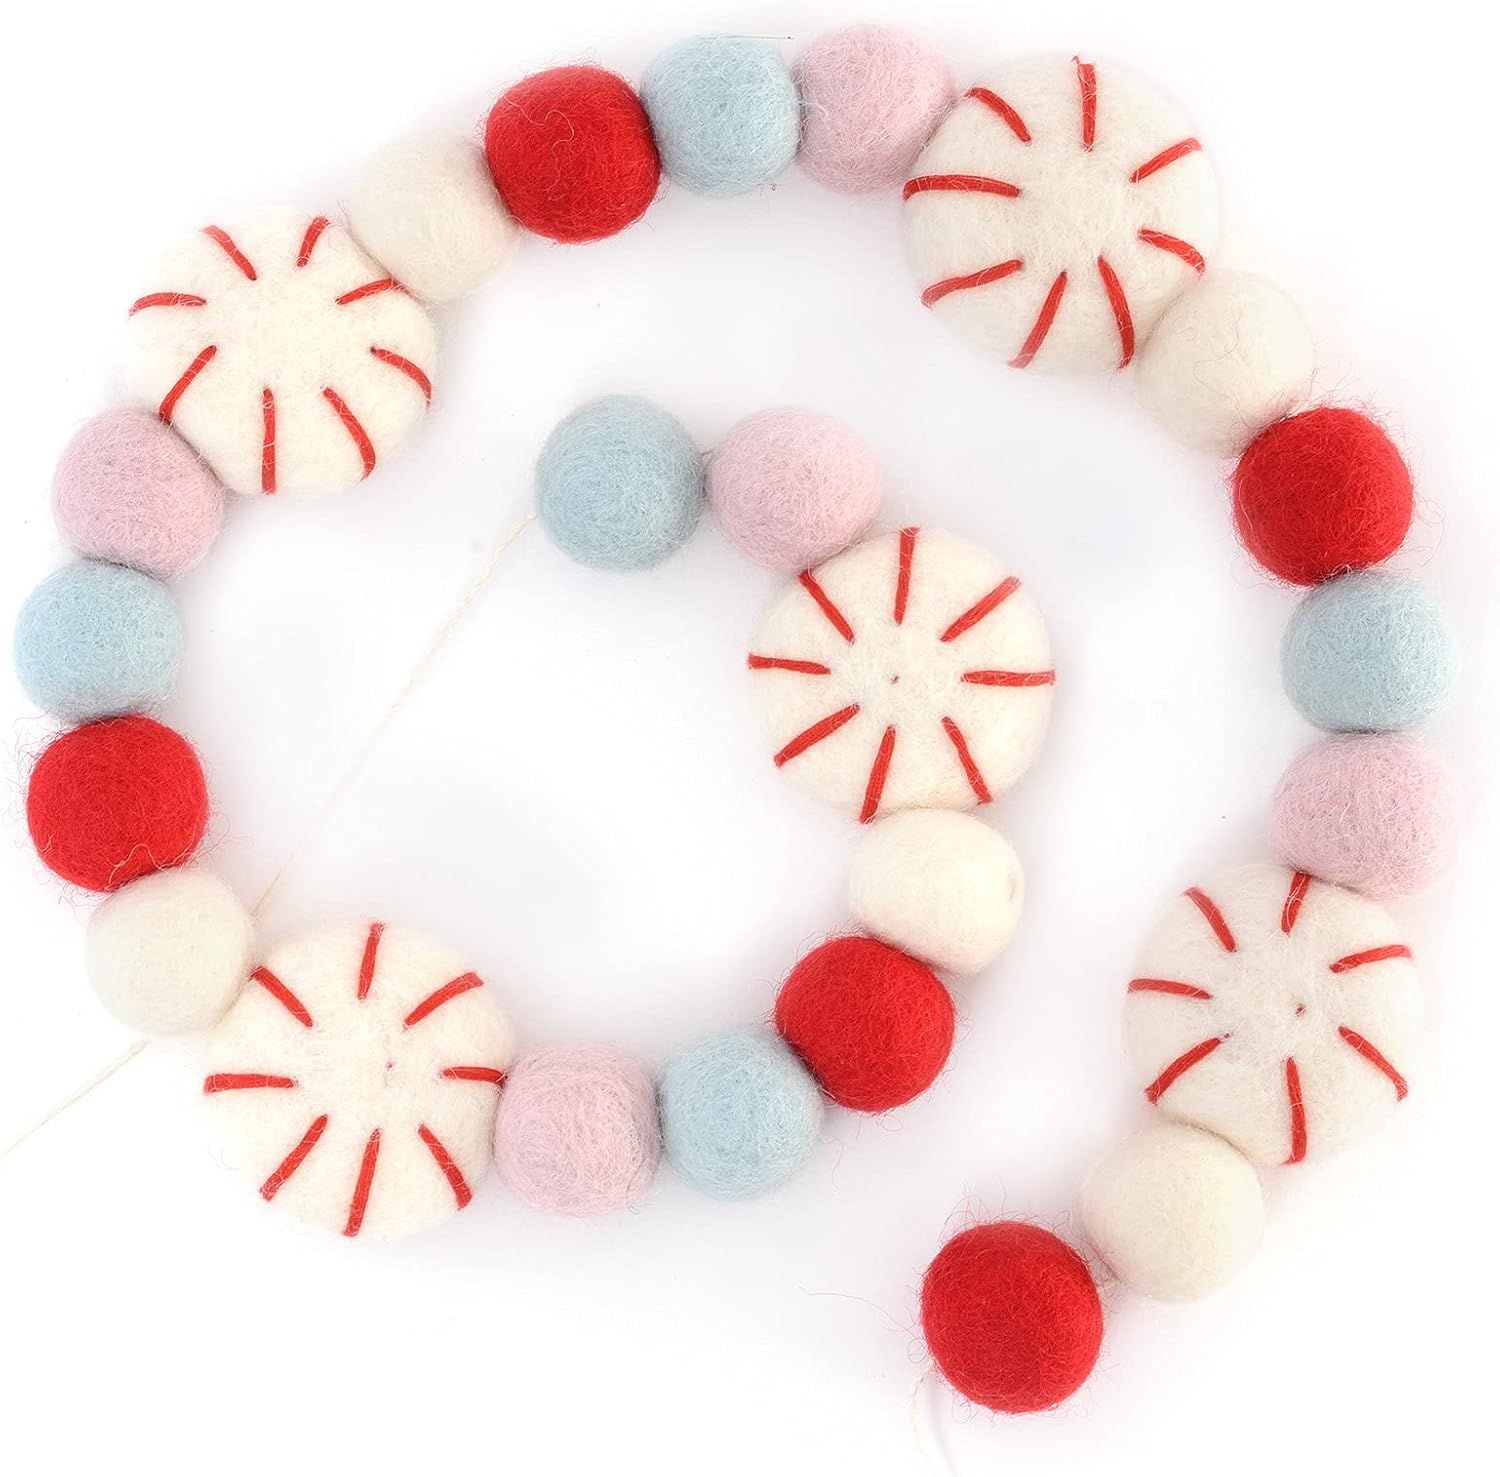 Glaciart One Peppermint Felt Ball Garland - Pompom Holiday Decoration Hand-Made from Natural Wool -  | Amazon (US)